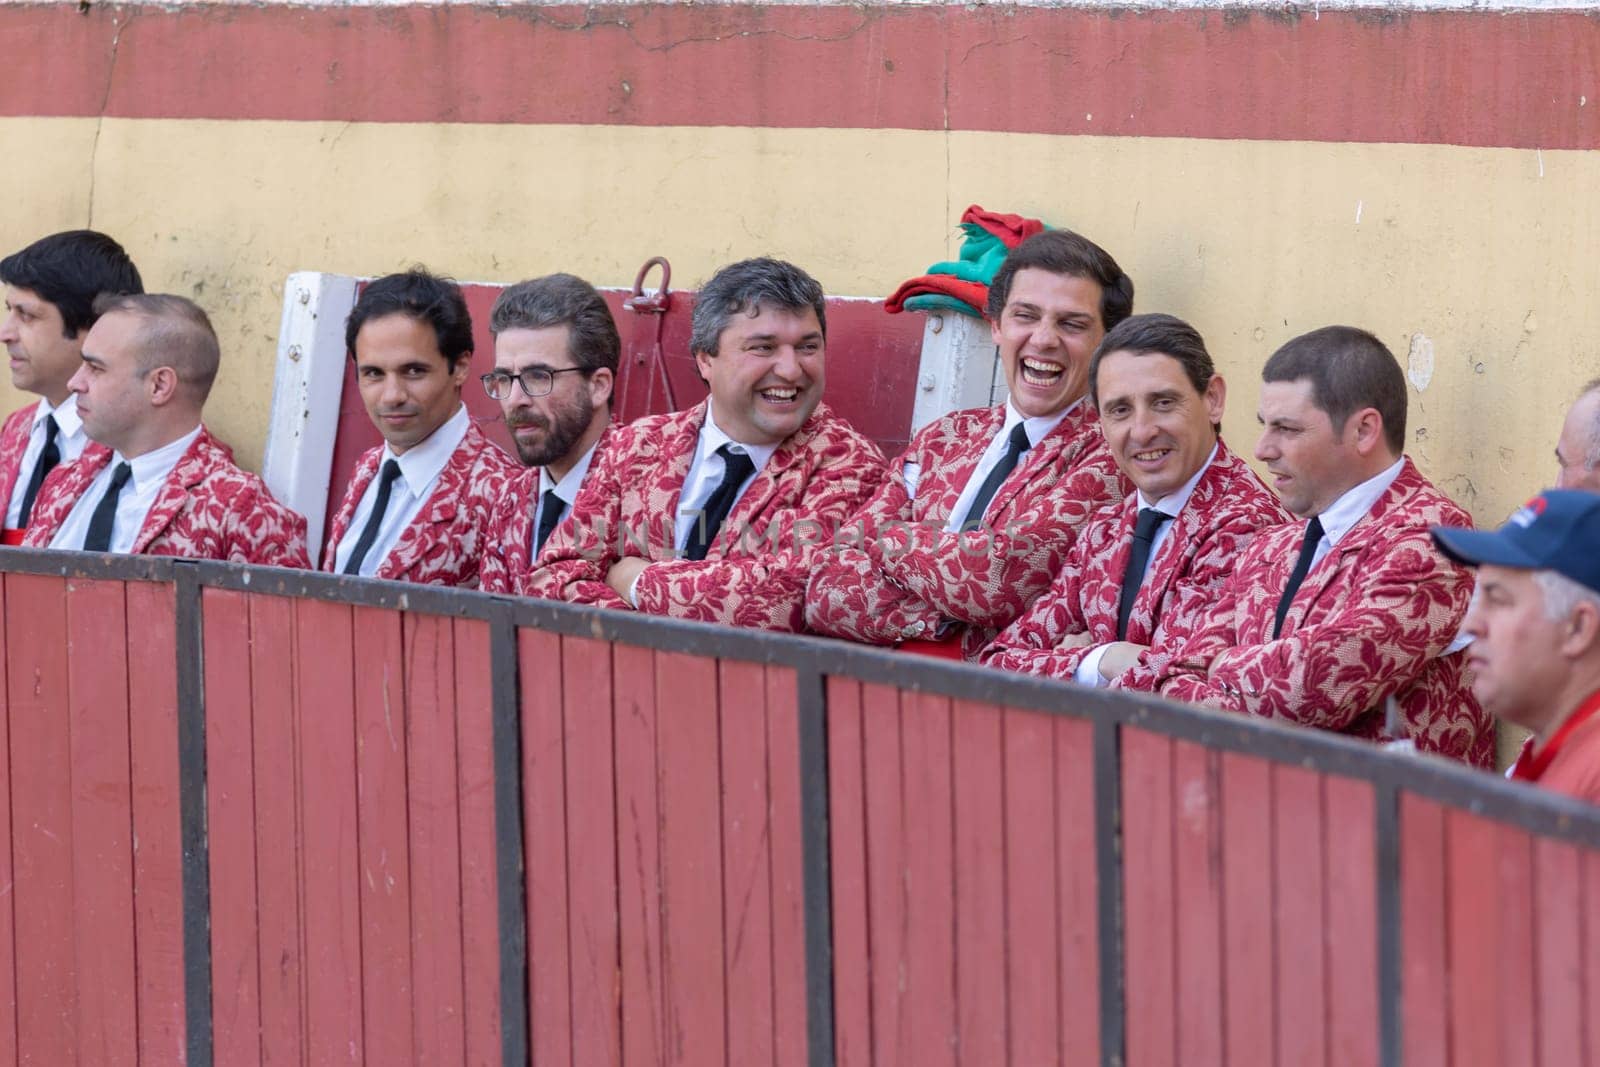 March 26, 2023 Lisbon, Portugal: Tourada - laughing and smiling forcado team by the arena fence. Mid shot